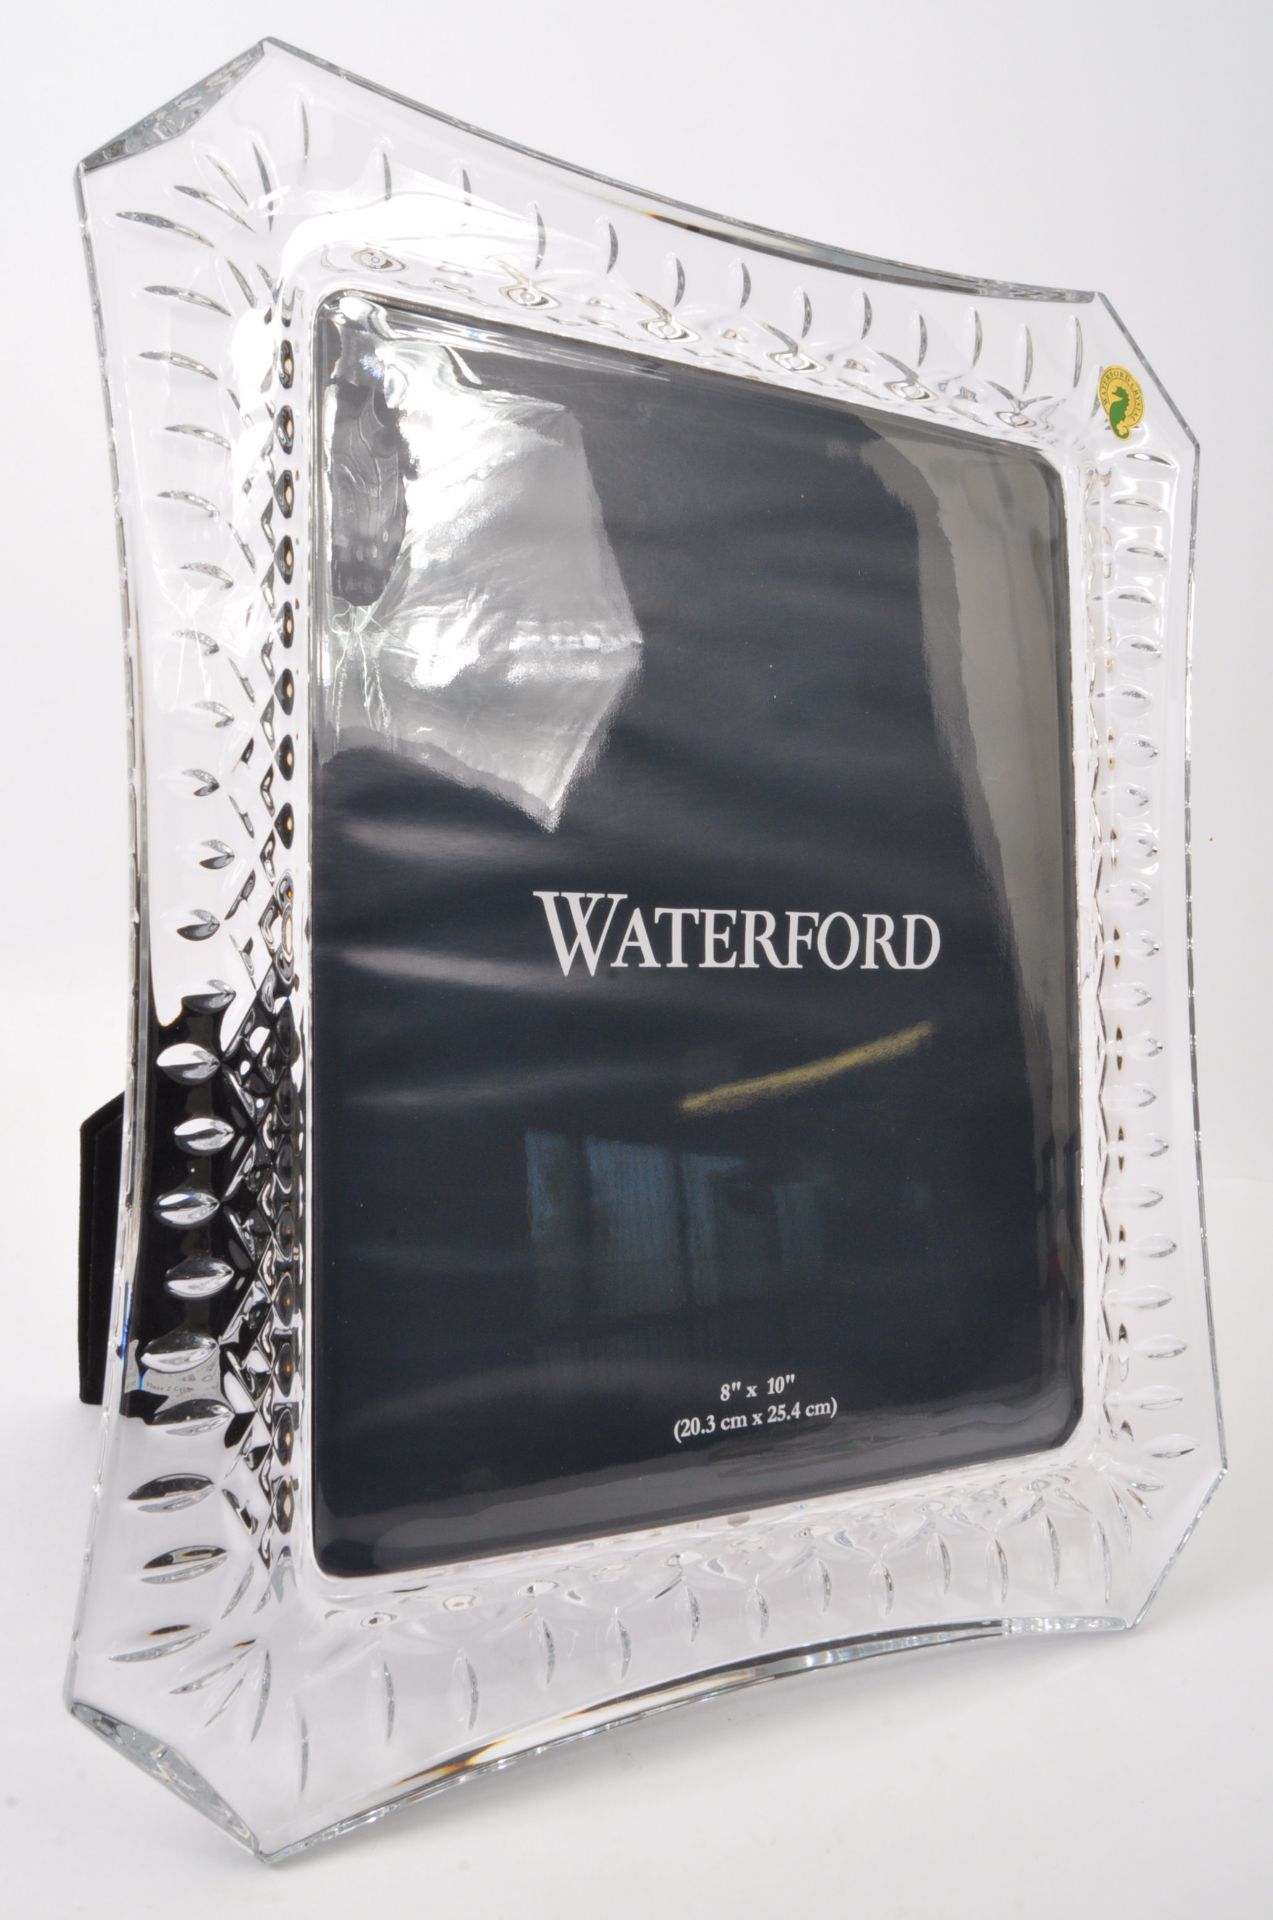 NOS WATERFORD CRYSTAL LISMORE PHOTO FRAME IN BOX